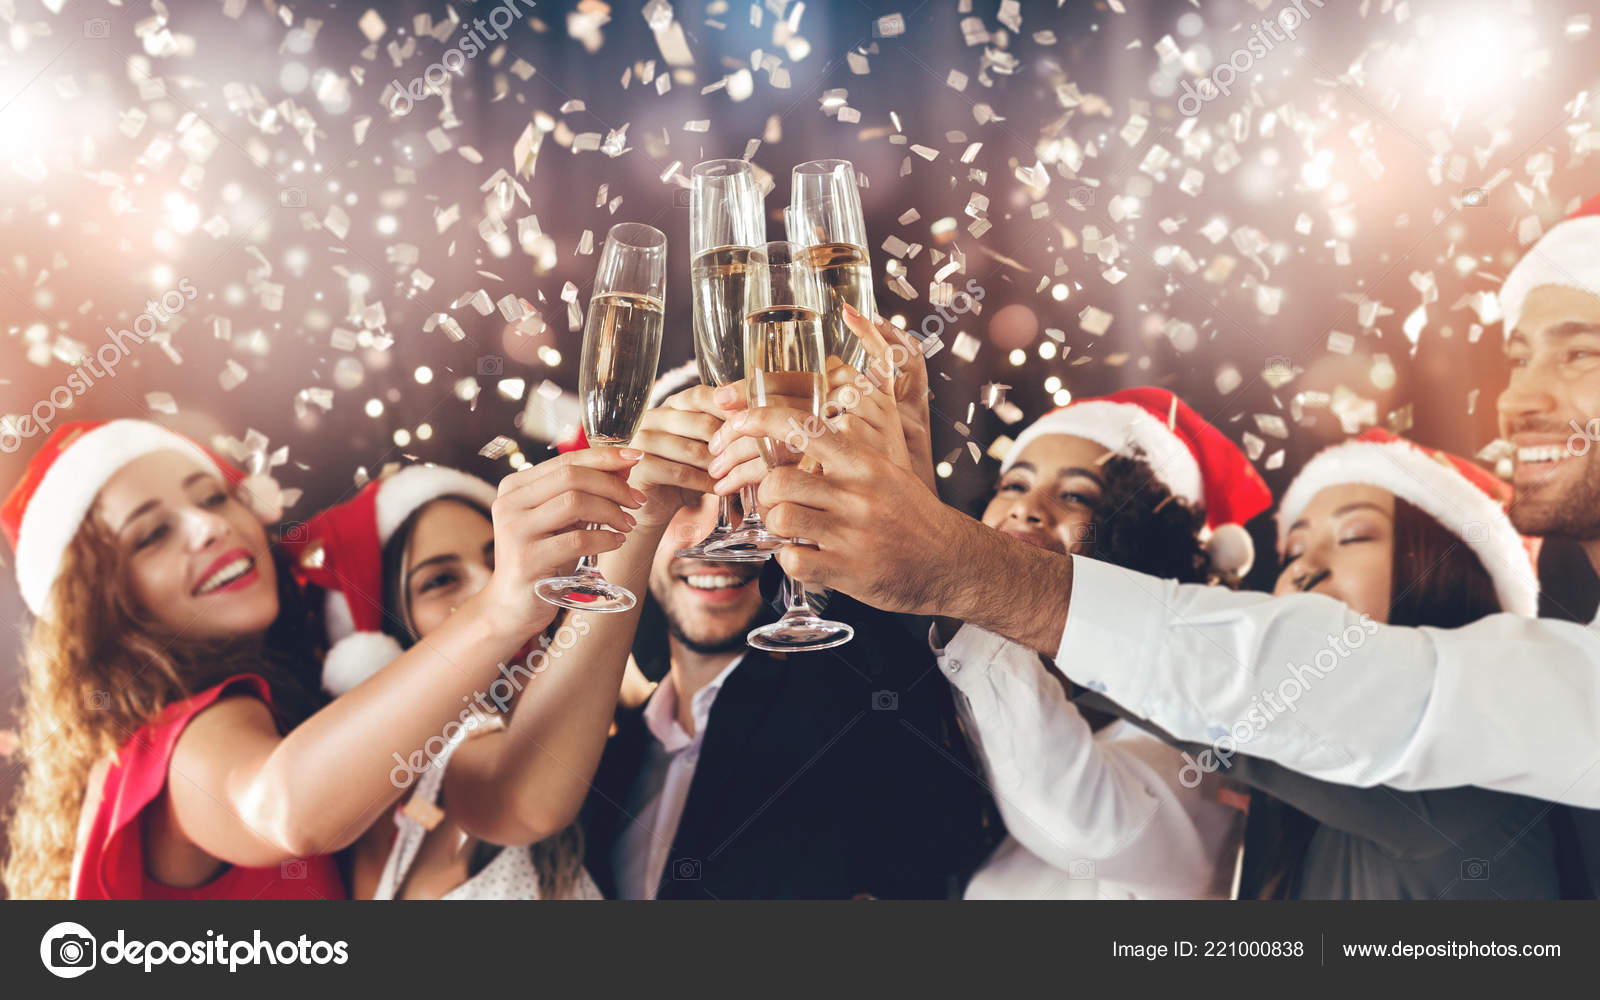 depositphotos_221000838-stock-photo-diverse-friends-clinking-with-champagne.jpg